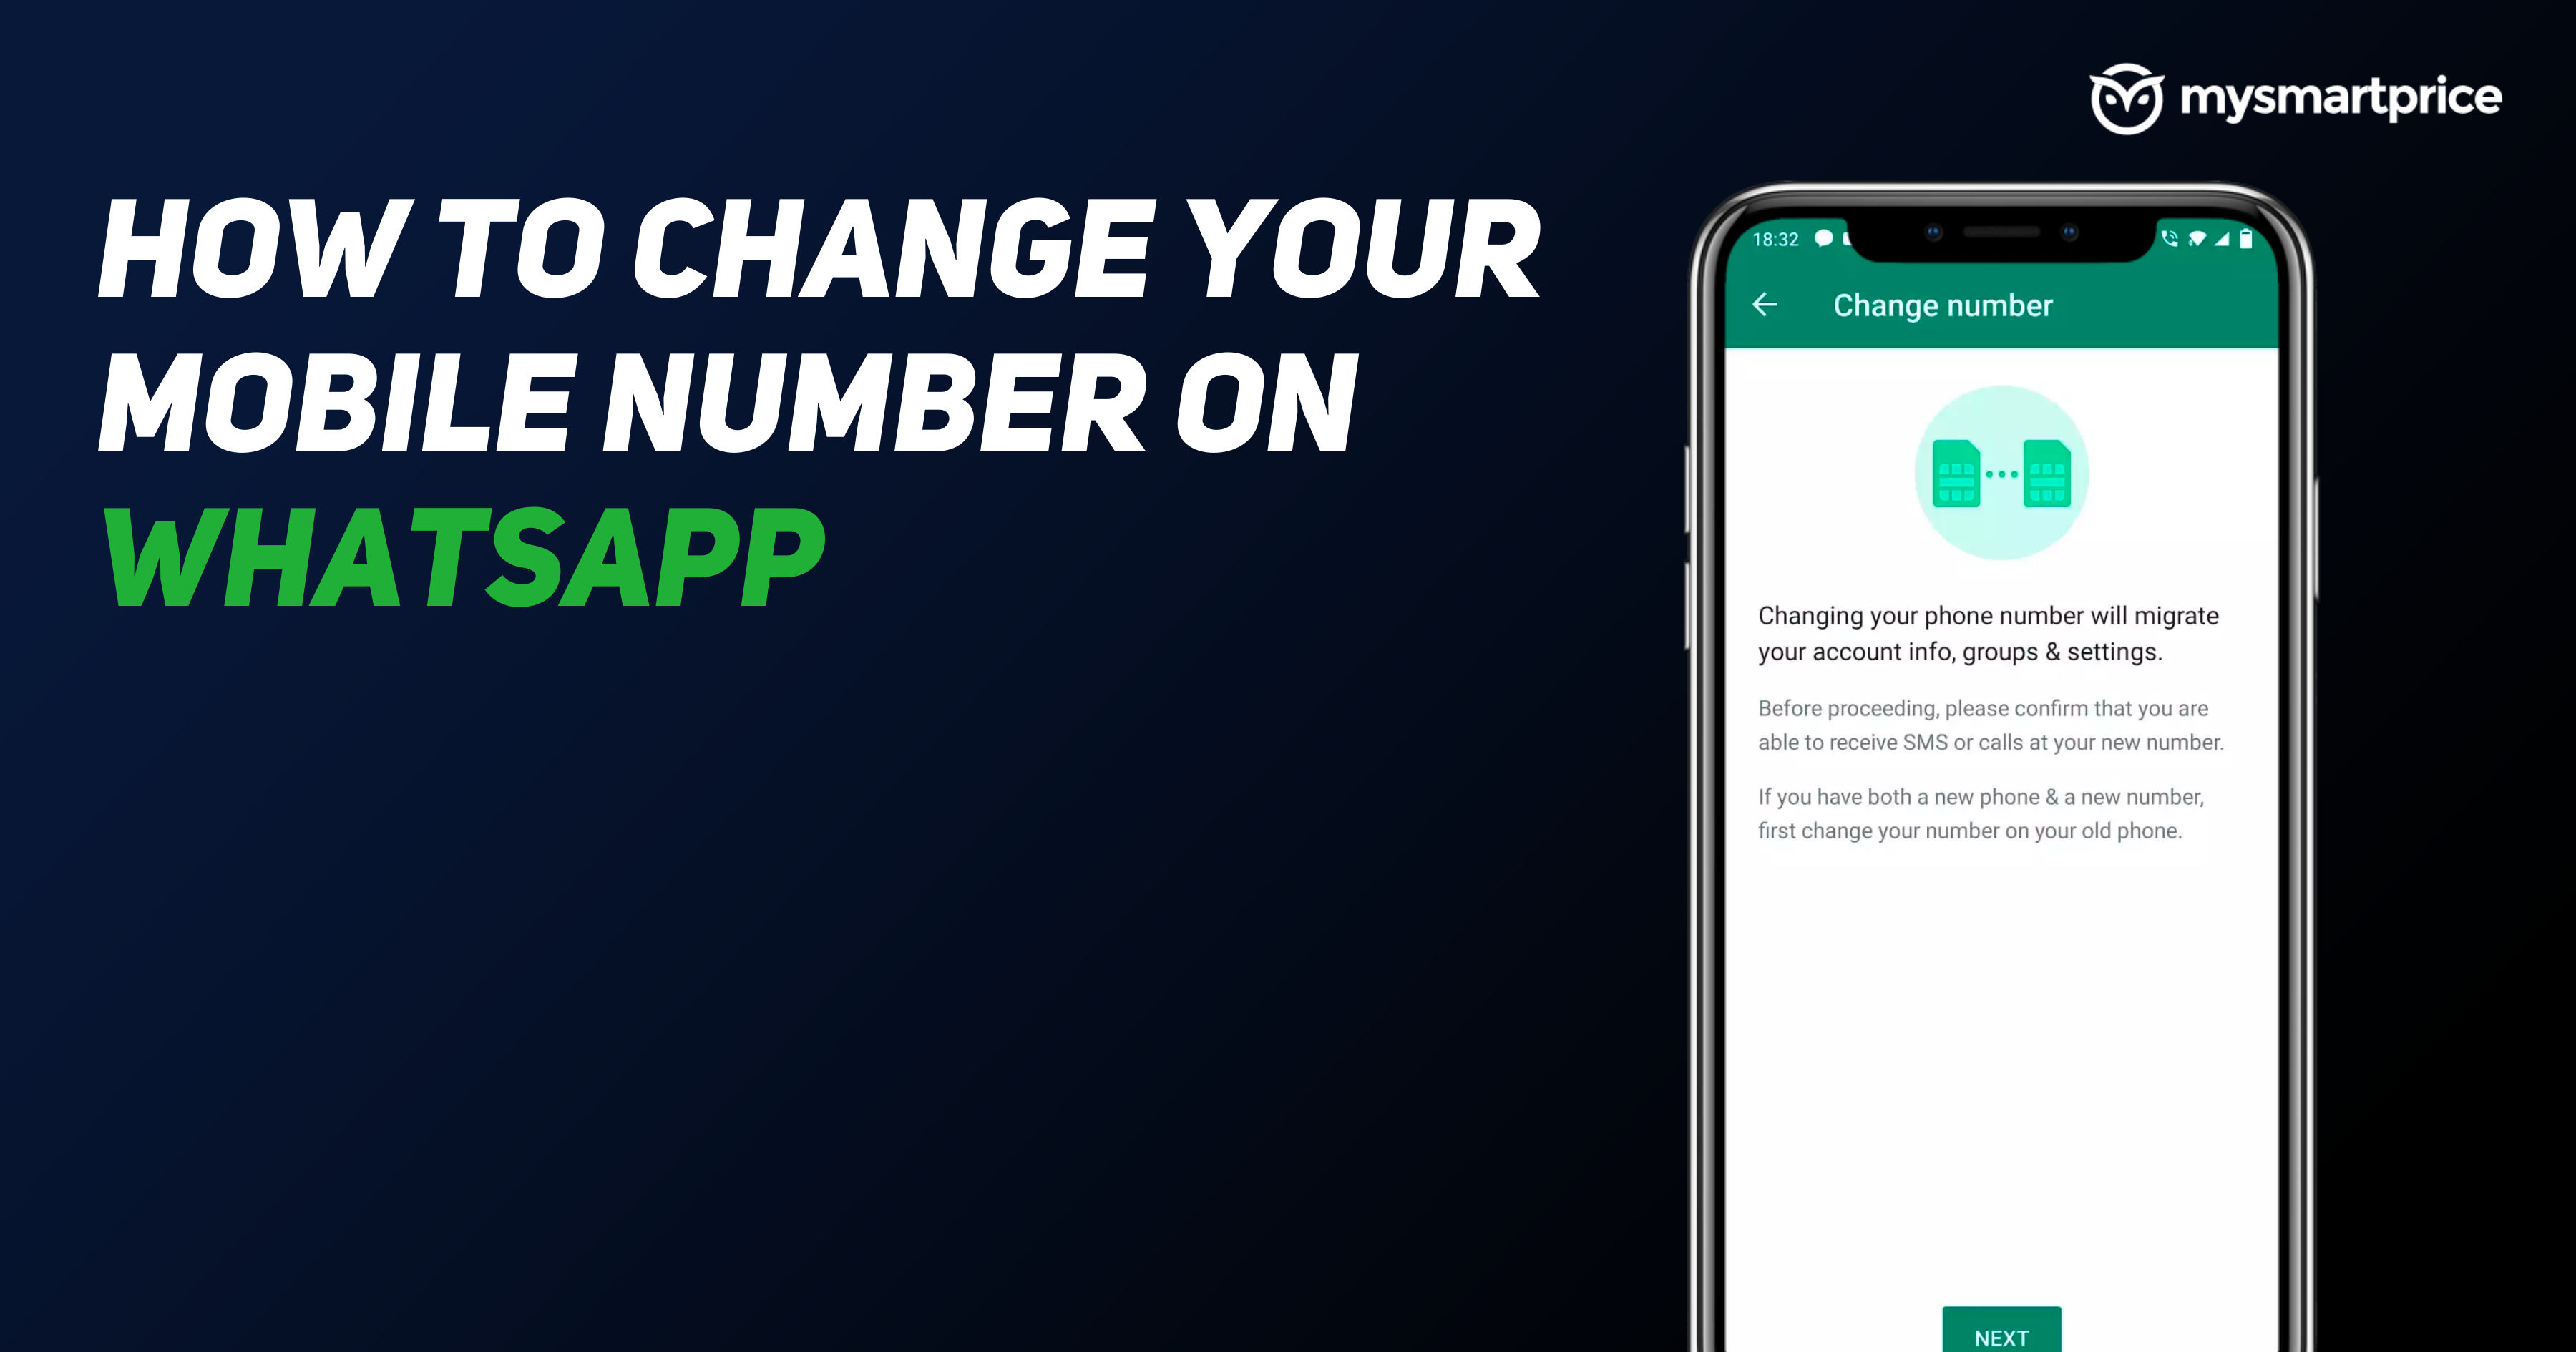 WhatsApp Change Number: How to Change your Mobile Number on WhatsApp Using Different Methods - MySmartPrice